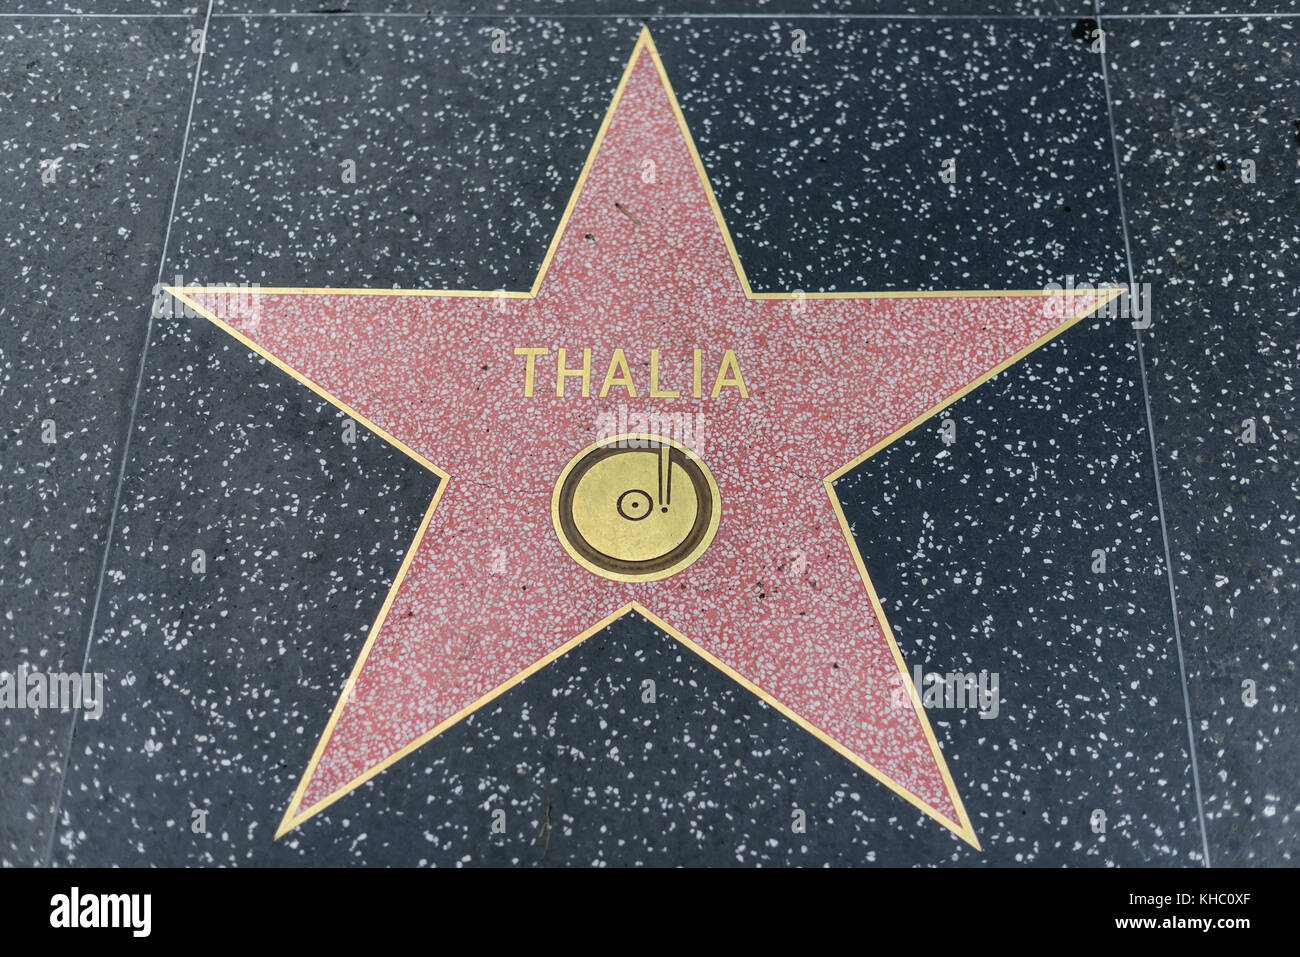 HOLLYWOOD, CA - DECEMBER 06: Thalia  star on the Hollywood Walk of Fame in Hollywood, California on Dec. 6, 2016. Stock Photo